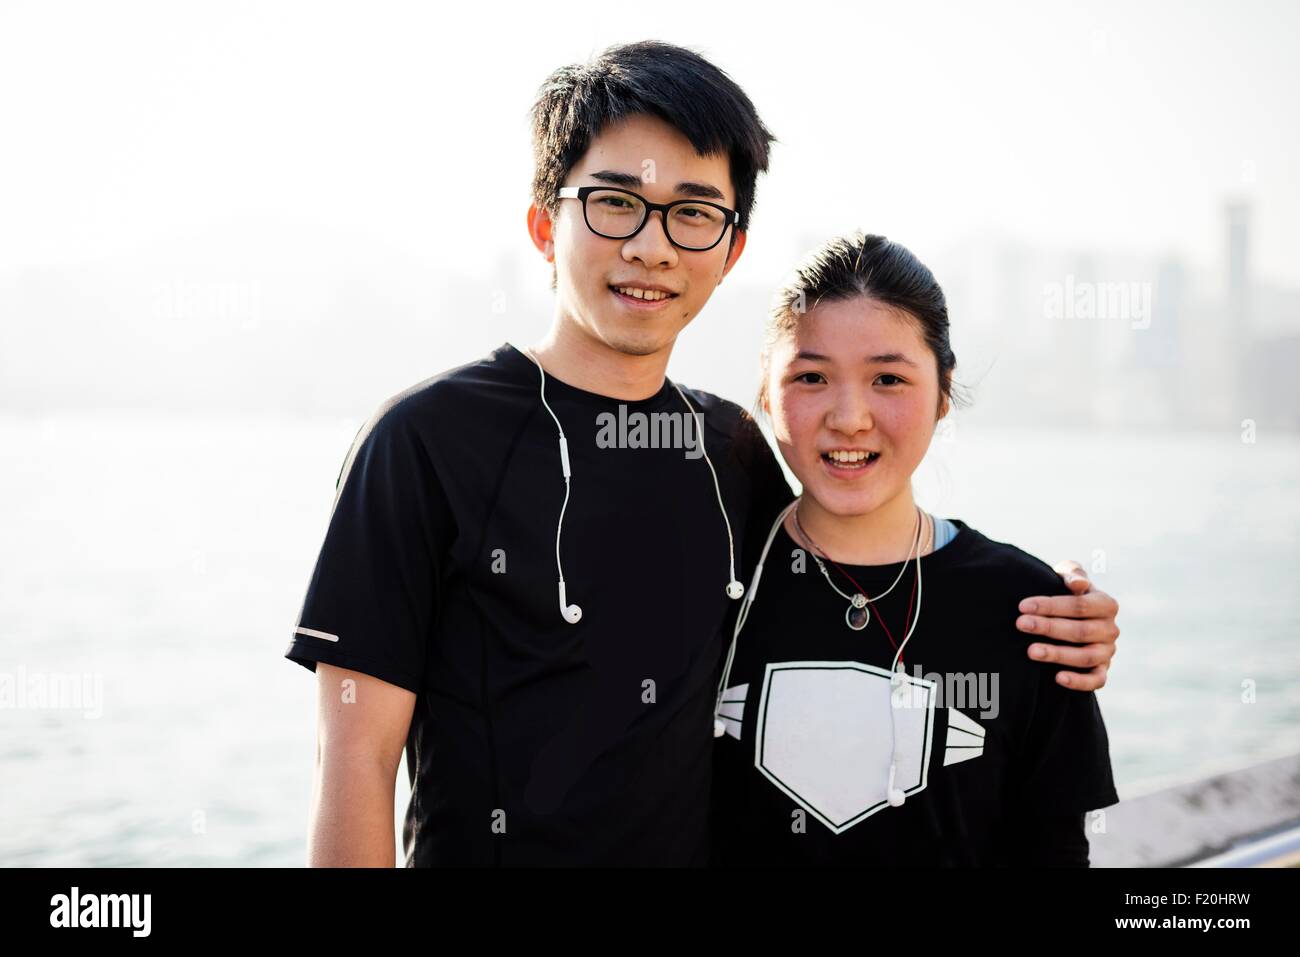 Portrait of young man with arm around young woman, wearing earphones, looking at camera smiling Stock Photo